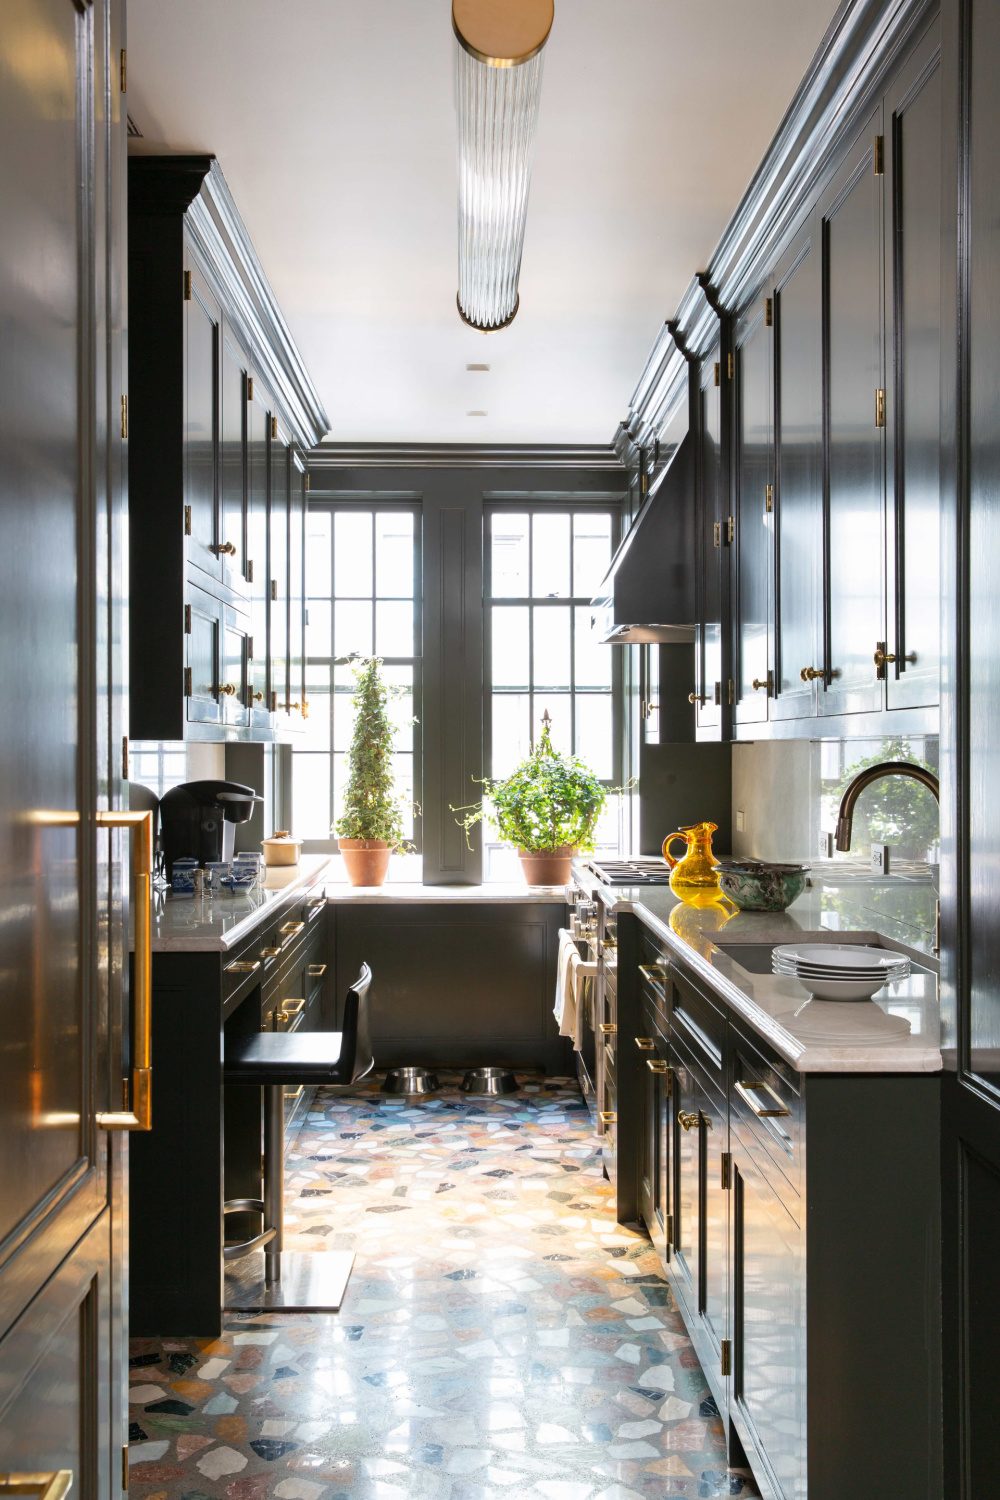 Bunny Williams's kitchen with dark Donald Kaufman Color custom colour and terrazzo floor (Durite) in a 1920's Gothic Revival New York apartment. #bunnywilliams #blackcabinets #kitchendesign #bespokekitchen #galleykitchens